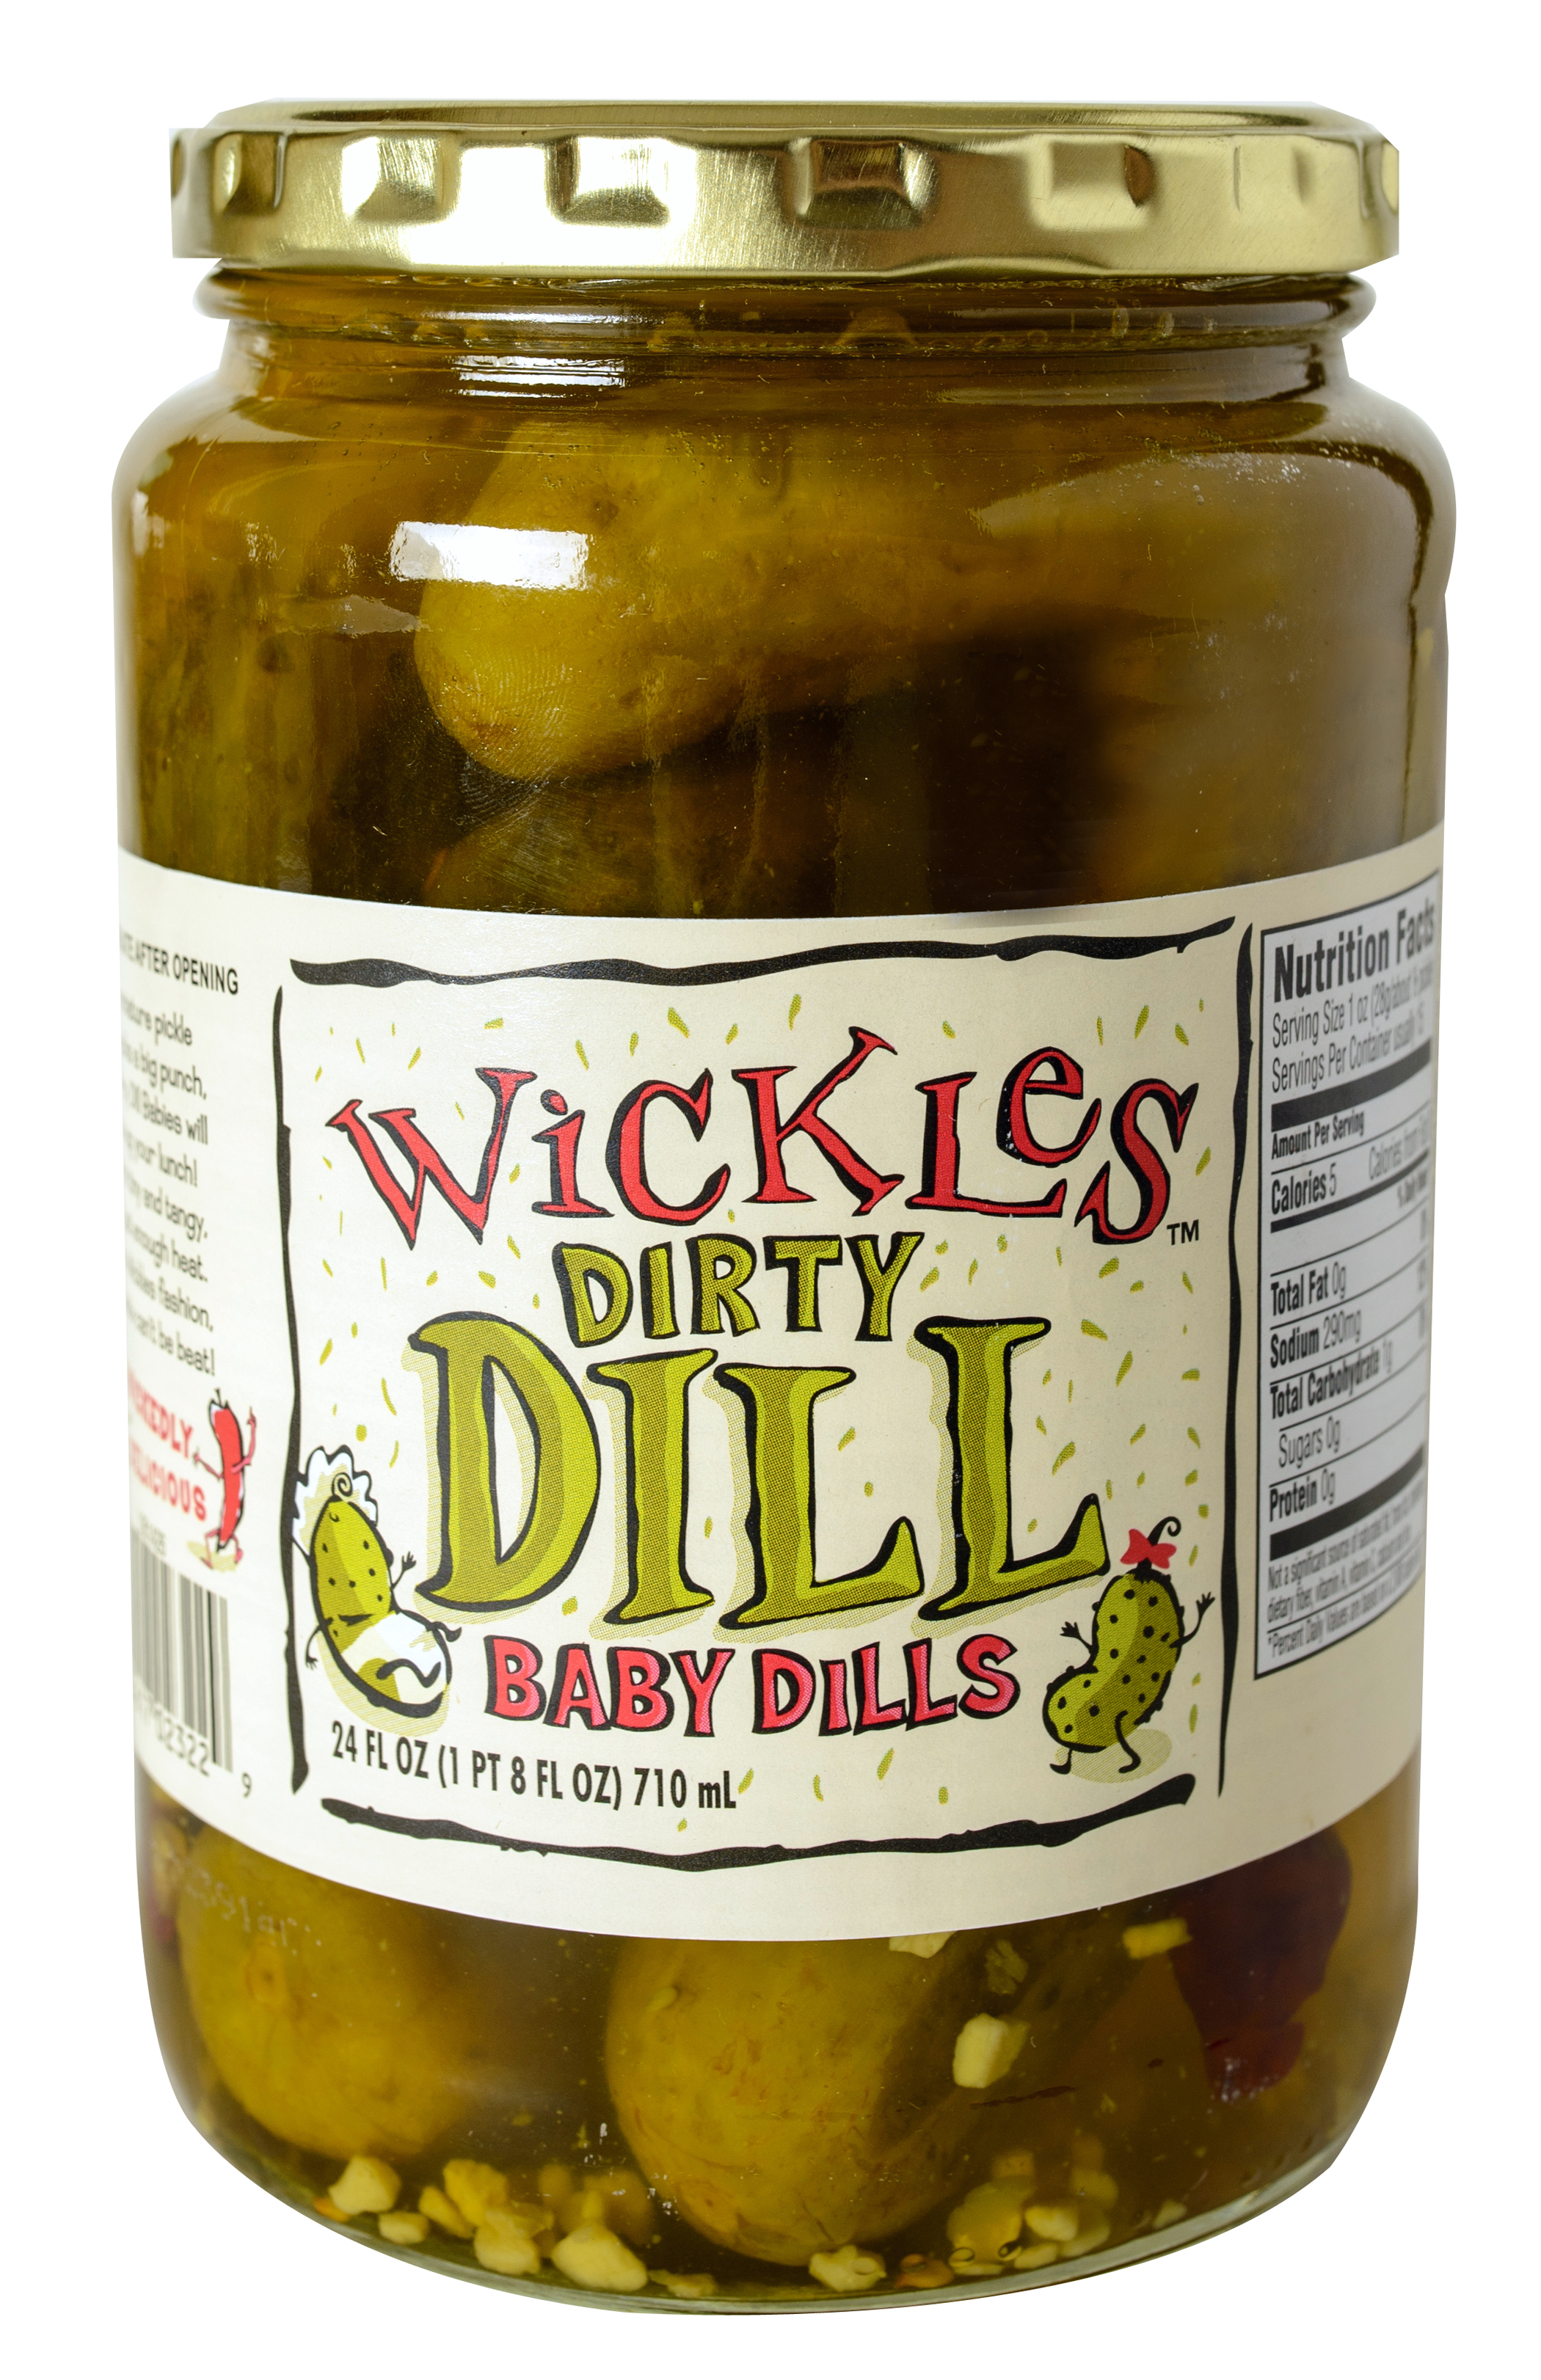 Wickles Pickles, Dirty Dill, Baby Dills - 24 fl oz